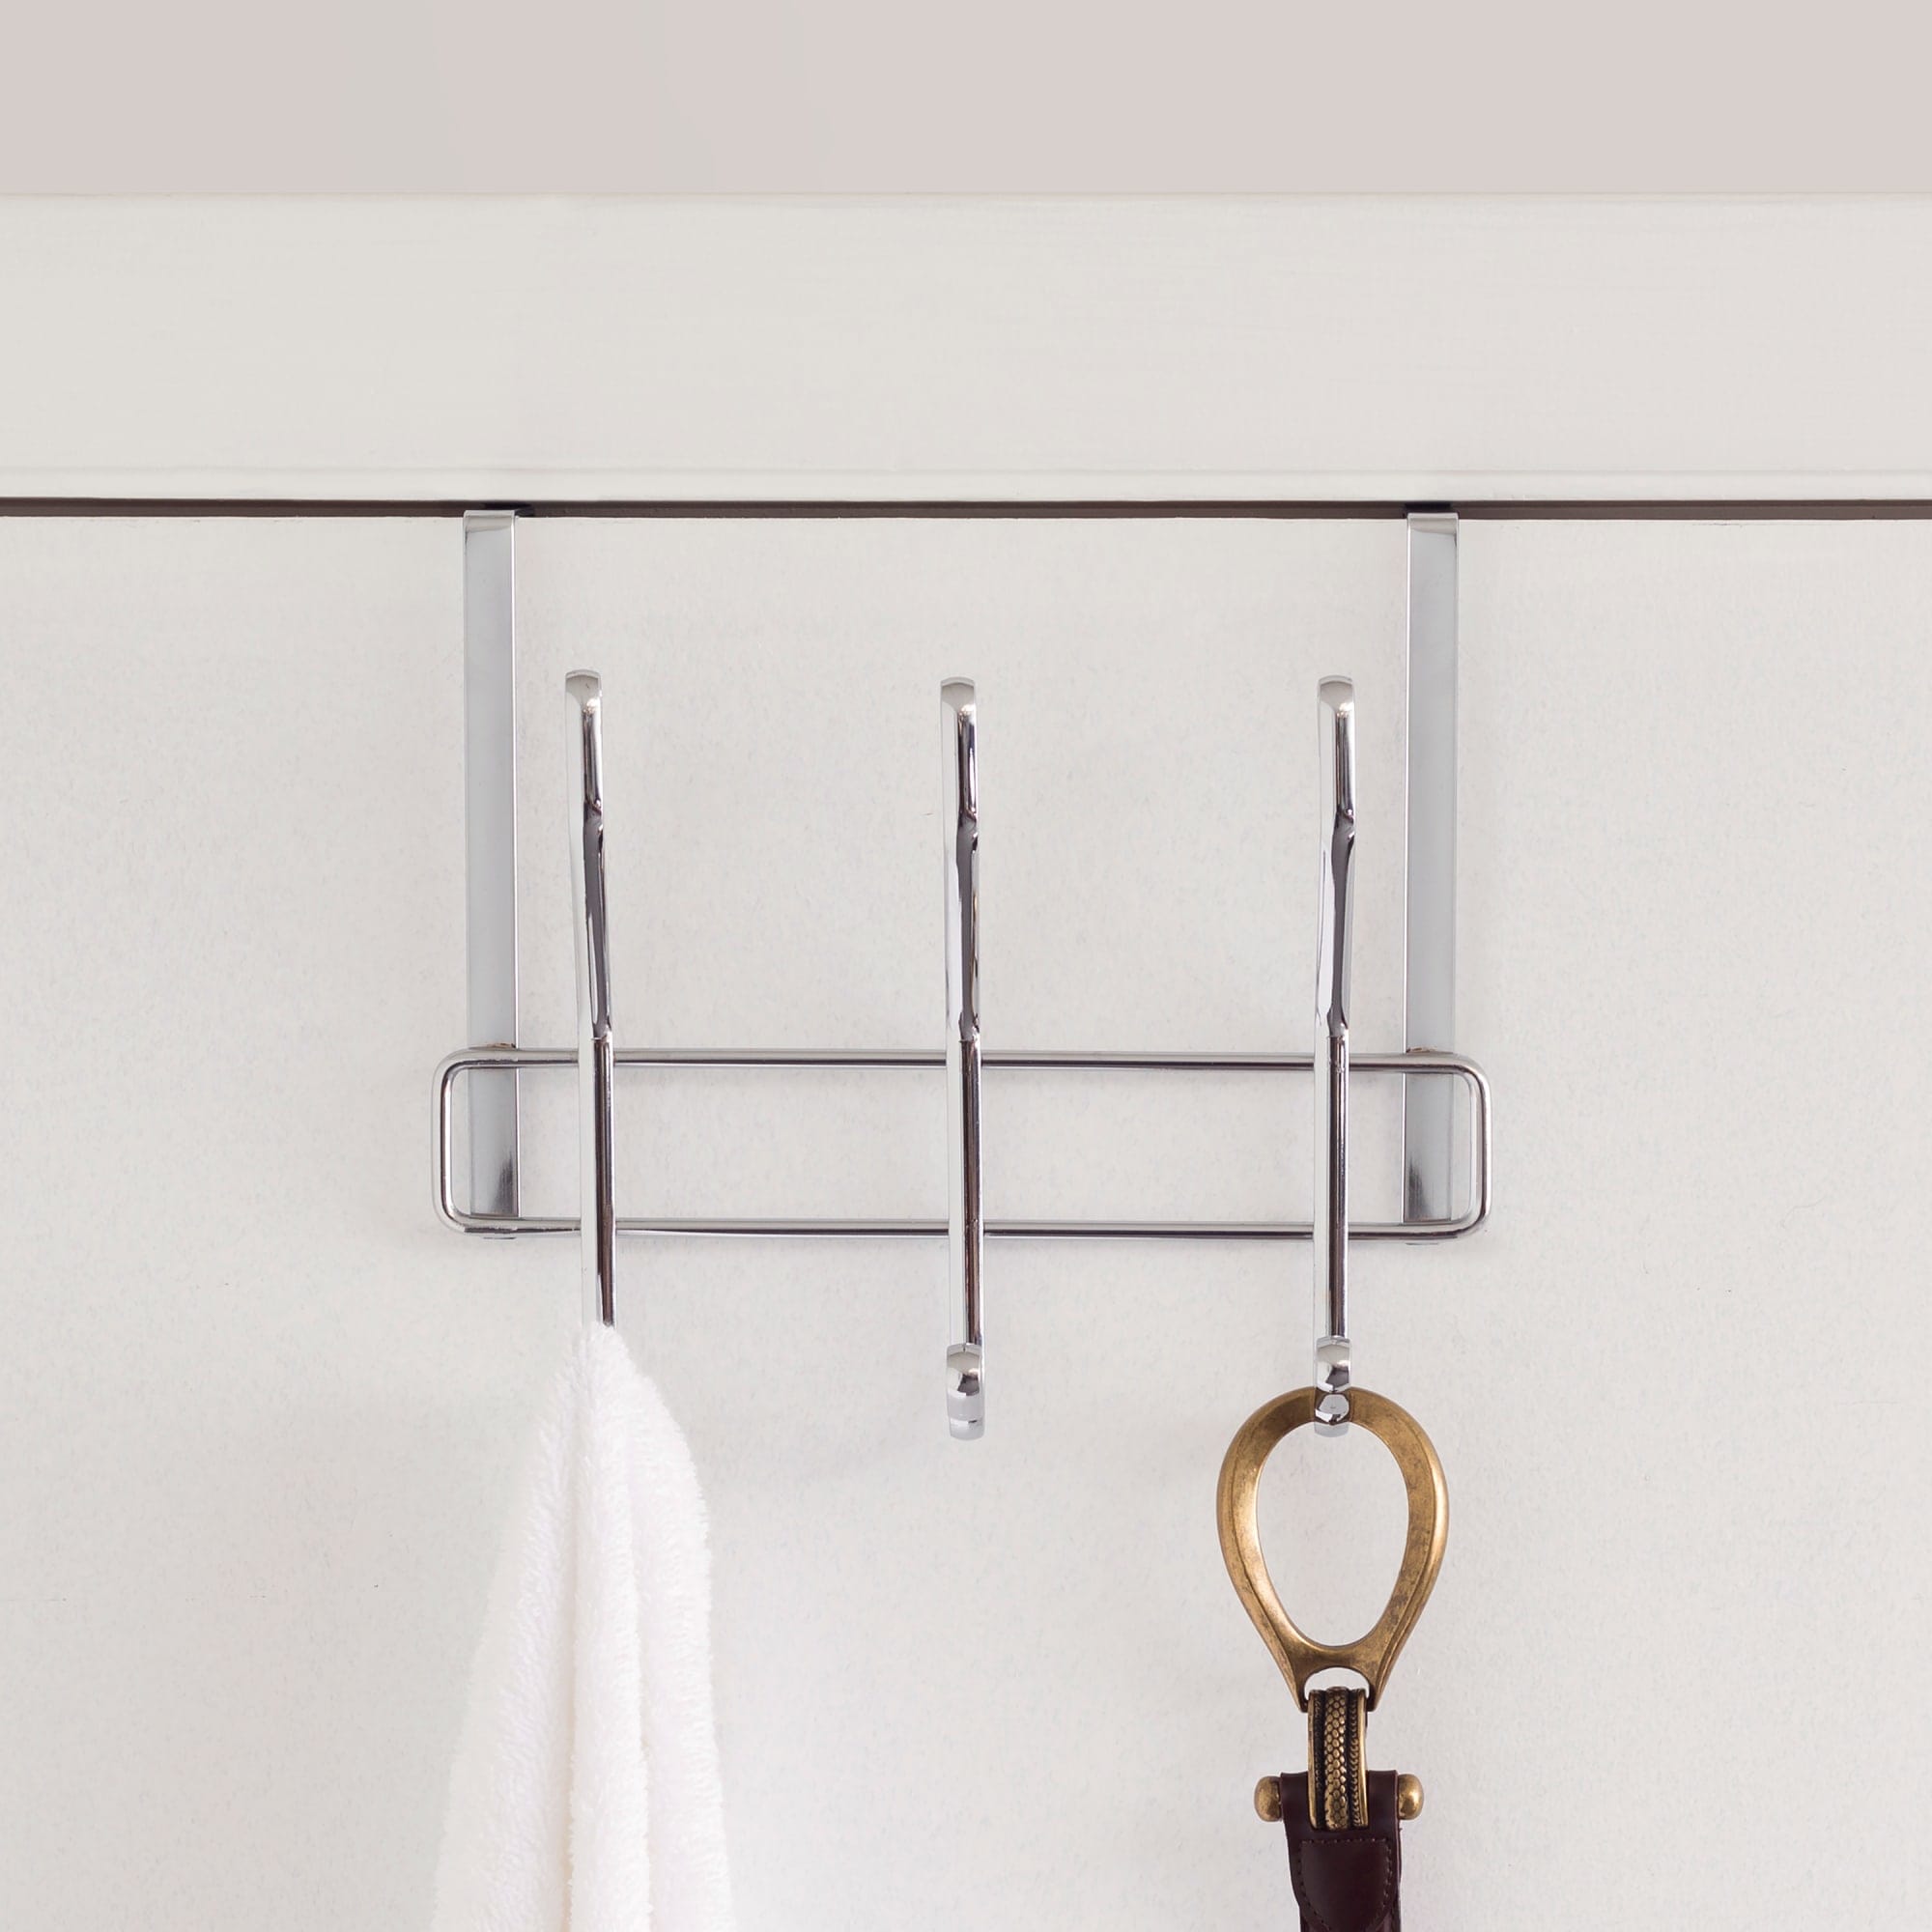 Home Basics 3 Dual Hook Over the Door Steel Hanging Organizing Rack, Chrome $5.00 EACH, CASE PACK OF 24